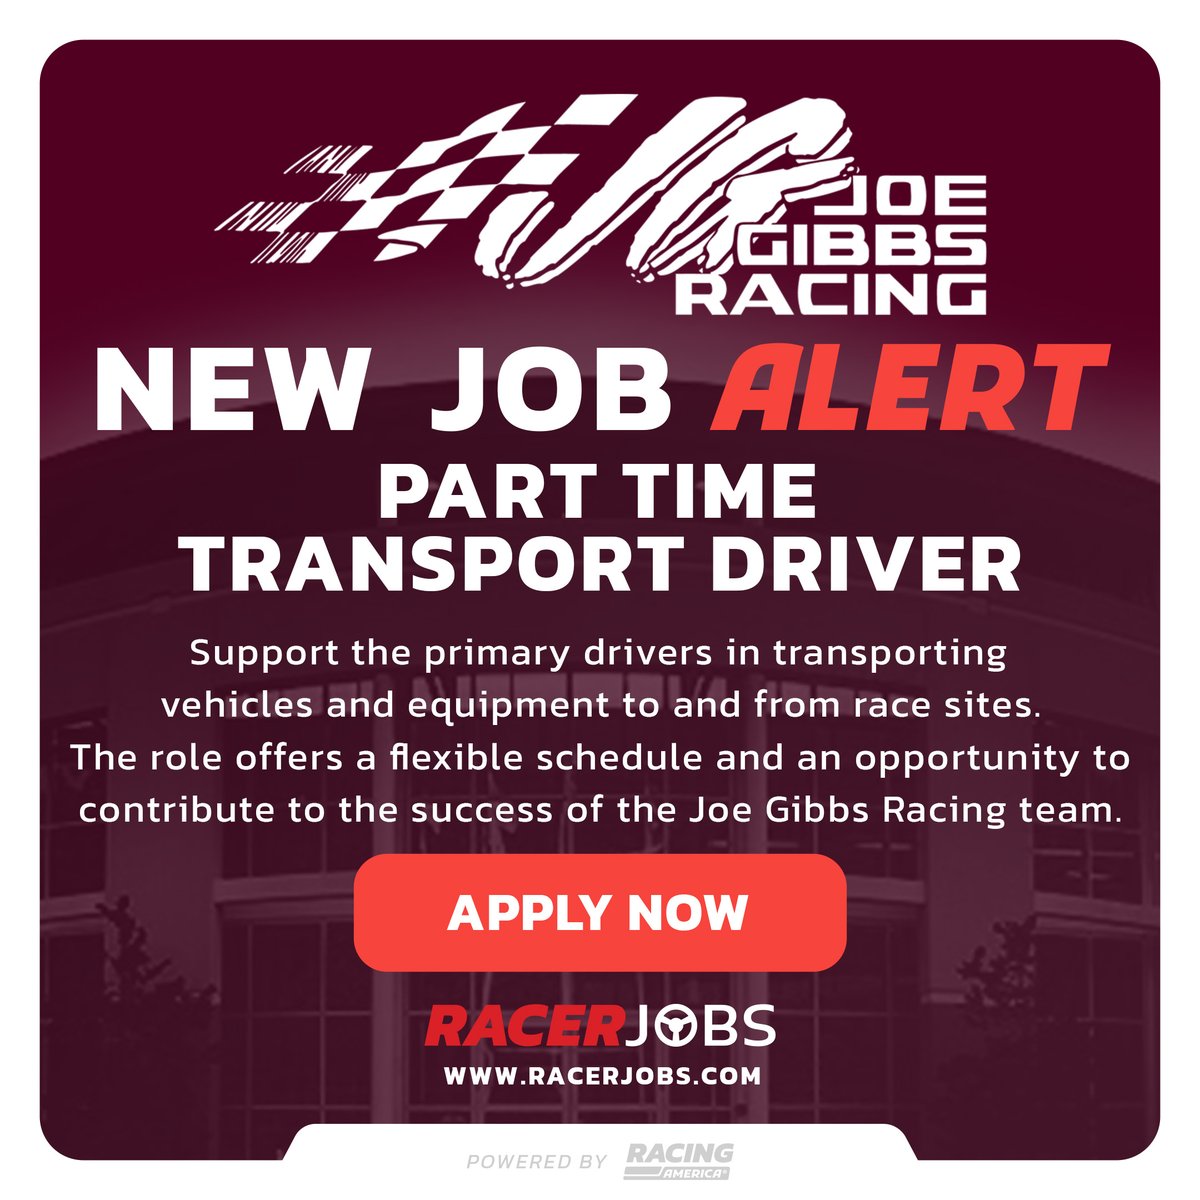 Do you have truck driving experience and want to hit the road with Joe Gibbs Racing? We have an immediate need for a part-time Transport Driver. Apply here: racerjobs.com/jobs/319842862…